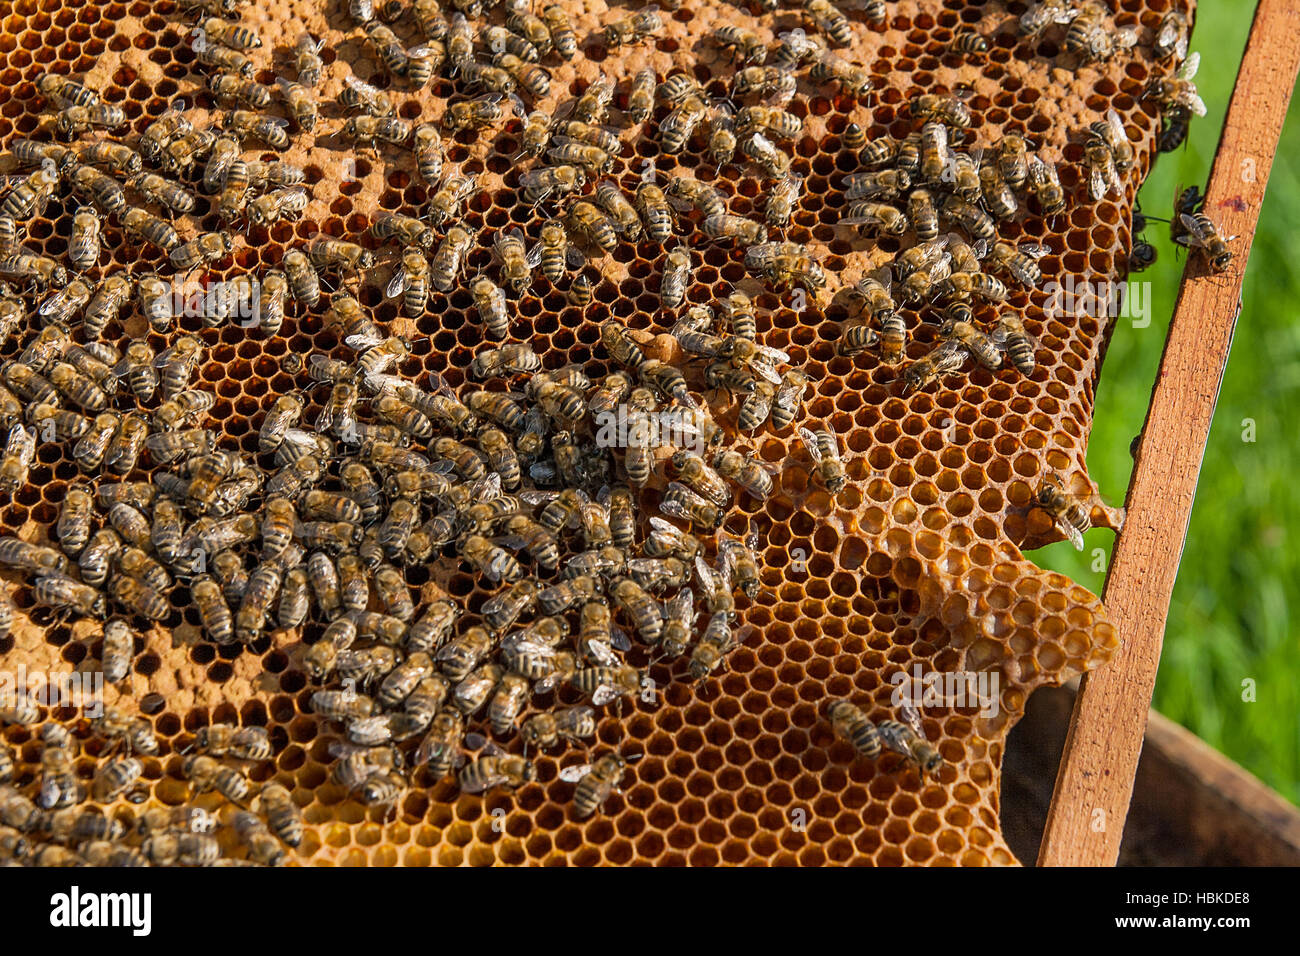 Busy bees inside hive with open and sealed cells for their young. Birth of o a young bees. Close up showing some animals and honeycomb structure. Stock Photo